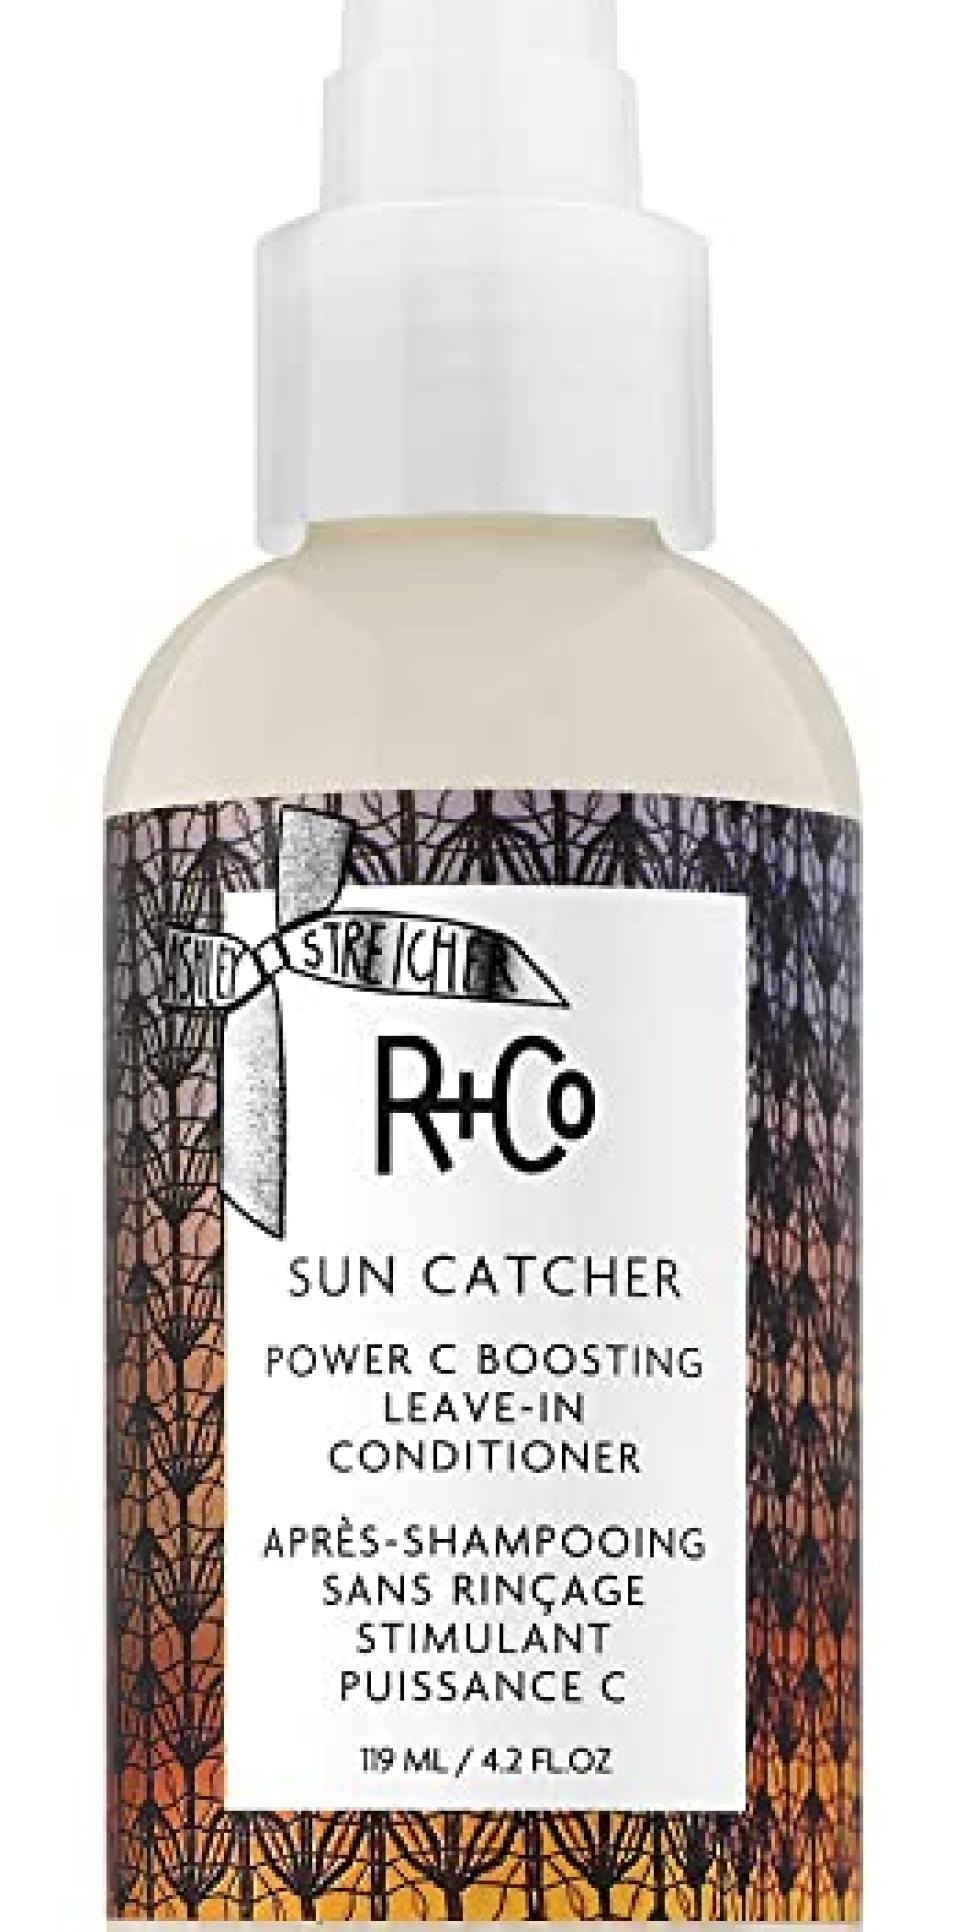 rx-amazonrco-sun-catcher-power-c-boosting-leave-in-conditioner.jpeg